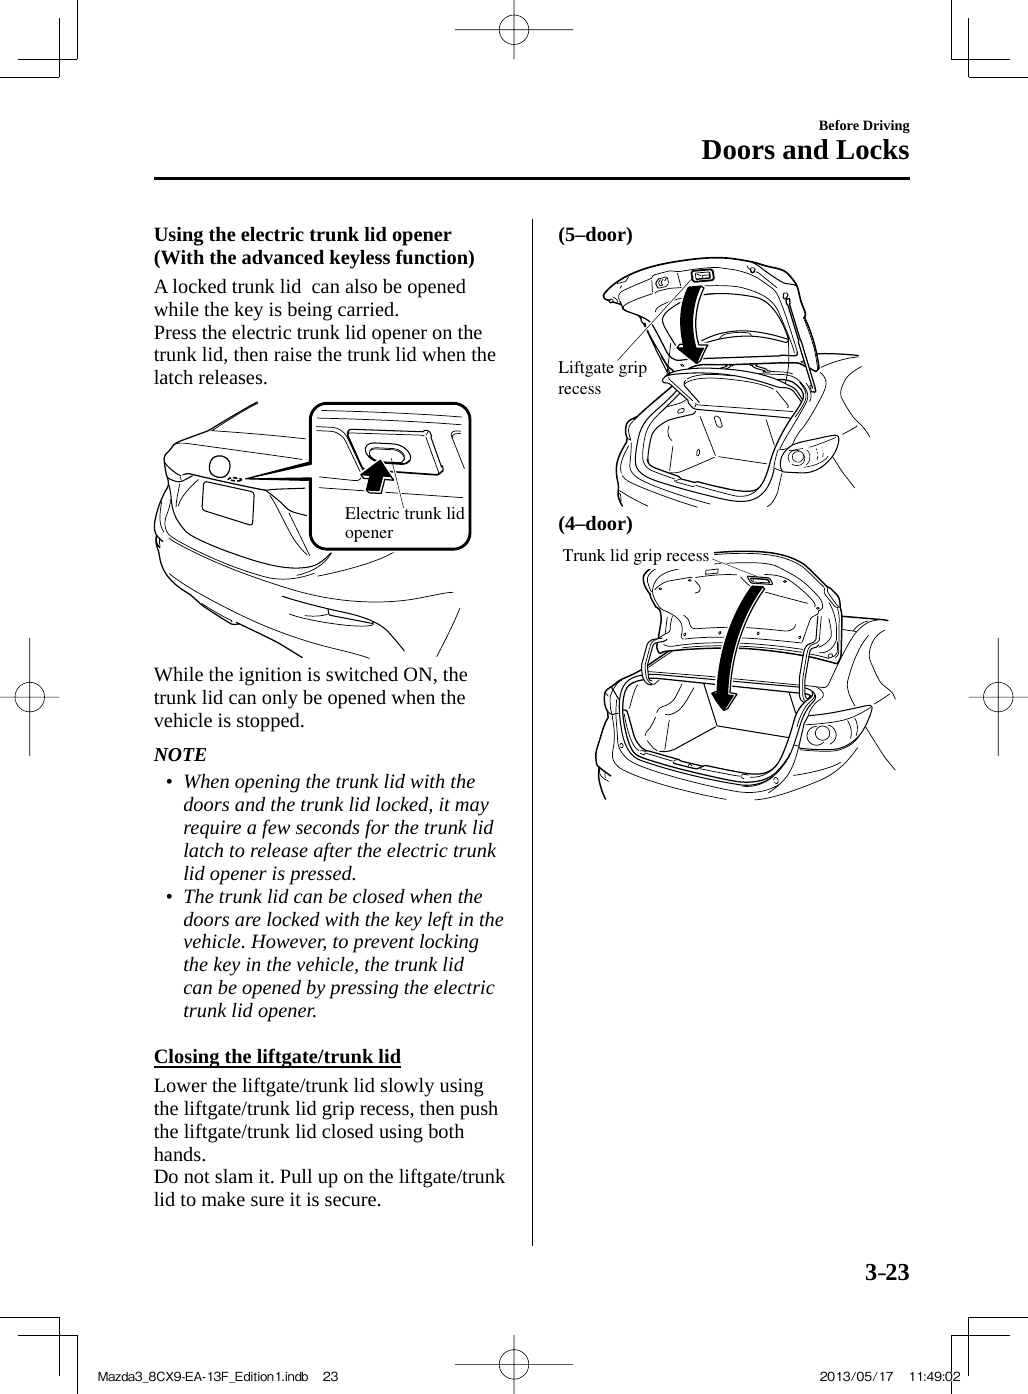 3–23Before DrivingDoors and Locks  Using the electric trunk lid opener (With the advanced keyless function)    A locked trunk lid  can also be opened while the key is being carried.  Press the electric trunk lid opener on the trunk lid, then raise the trunk lid when the latch releases.   Electric trunk lid opener   While the ignition is switched ON, the trunk lid can only be opened when the vehicle is stopped.   NOTE•         When opening the trunk lid with the doors and the trunk lid locked, it may require a few seconds for the trunk lid latch to release after the electric trunk lid opener is pressed.•         The trunk lid can be closed when the doors are locked with the key left in the vehicle. However, to prevent locking the key in the vehicle, the trunk lid can be opened by pressing the electric trunk lid opener.       Closing the liftgate/trunk lid    Lower the liftgate/trunk lid slowly using the liftgate/trunk lid grip recess, then push the liftgate/trunk lid closed using both hands.  Do not slam it. Pull up on the liftgate/trunk lid to make sure it is secure.   (5–door)    Liftgate grip recess    (4–door)    Trunk lid grip recess Mazda3_8CX9-EA-13F_Edition1.indb   23Mazda3_8CX9-EA-13F_Edition1.indb   23 2013/05/17   11:49:022013/05/17   11:49:02